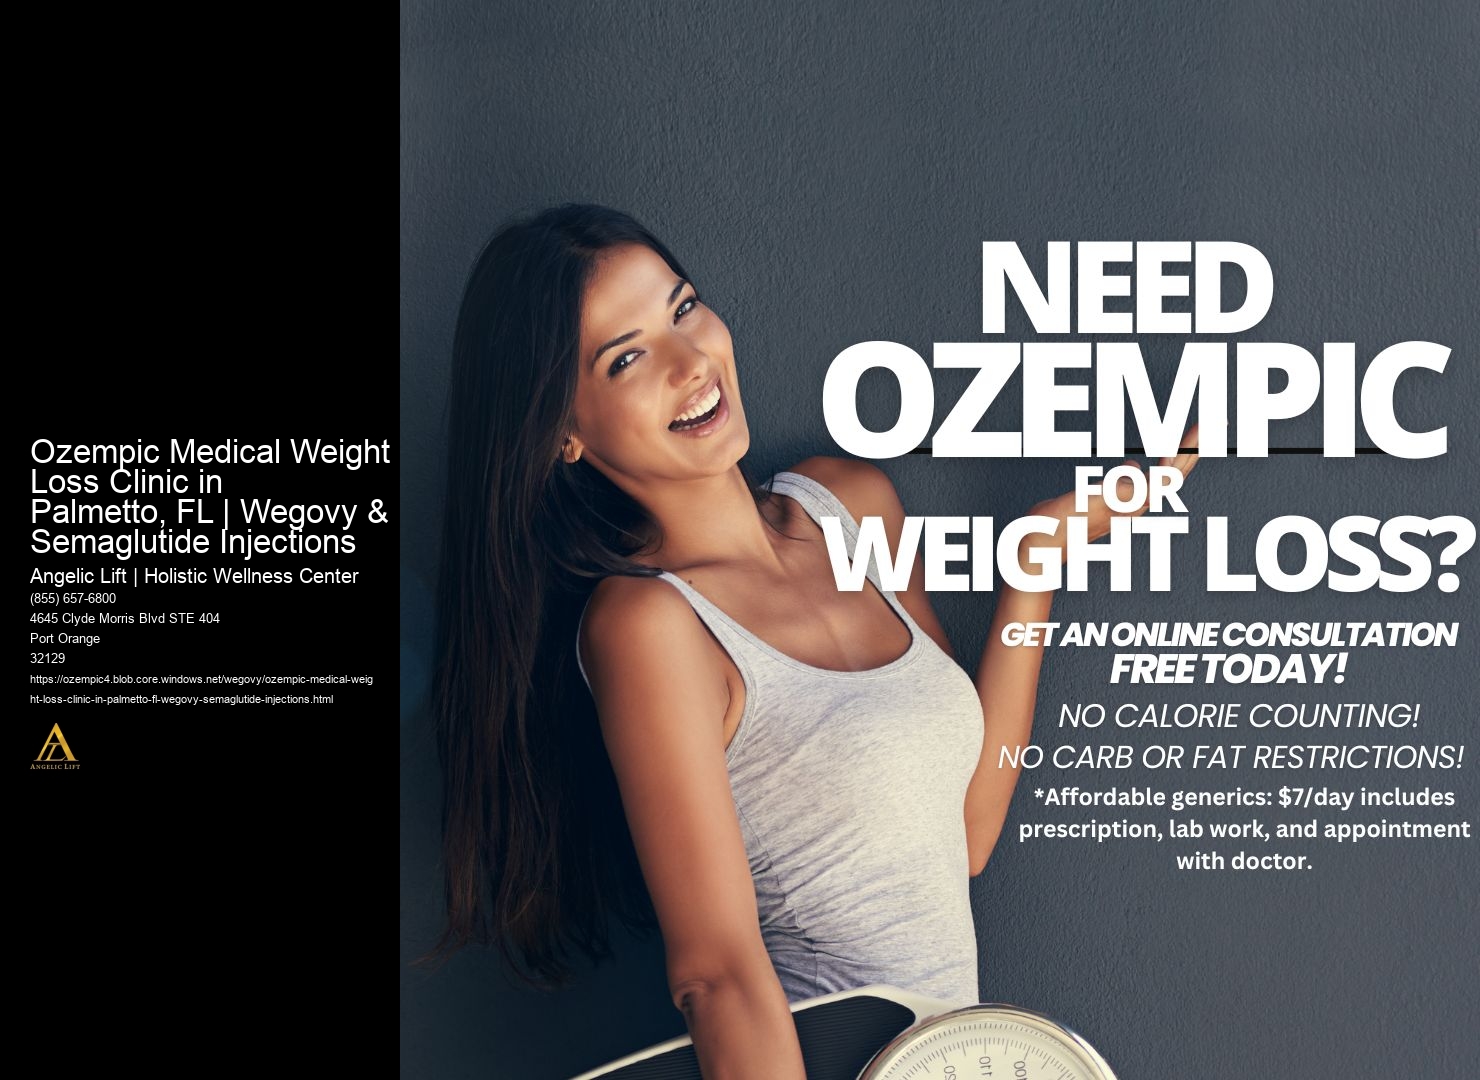 Ozempic Medical Weight Loss Clinic in Palmetto, FL | Wegovy & Semaglutide Injections